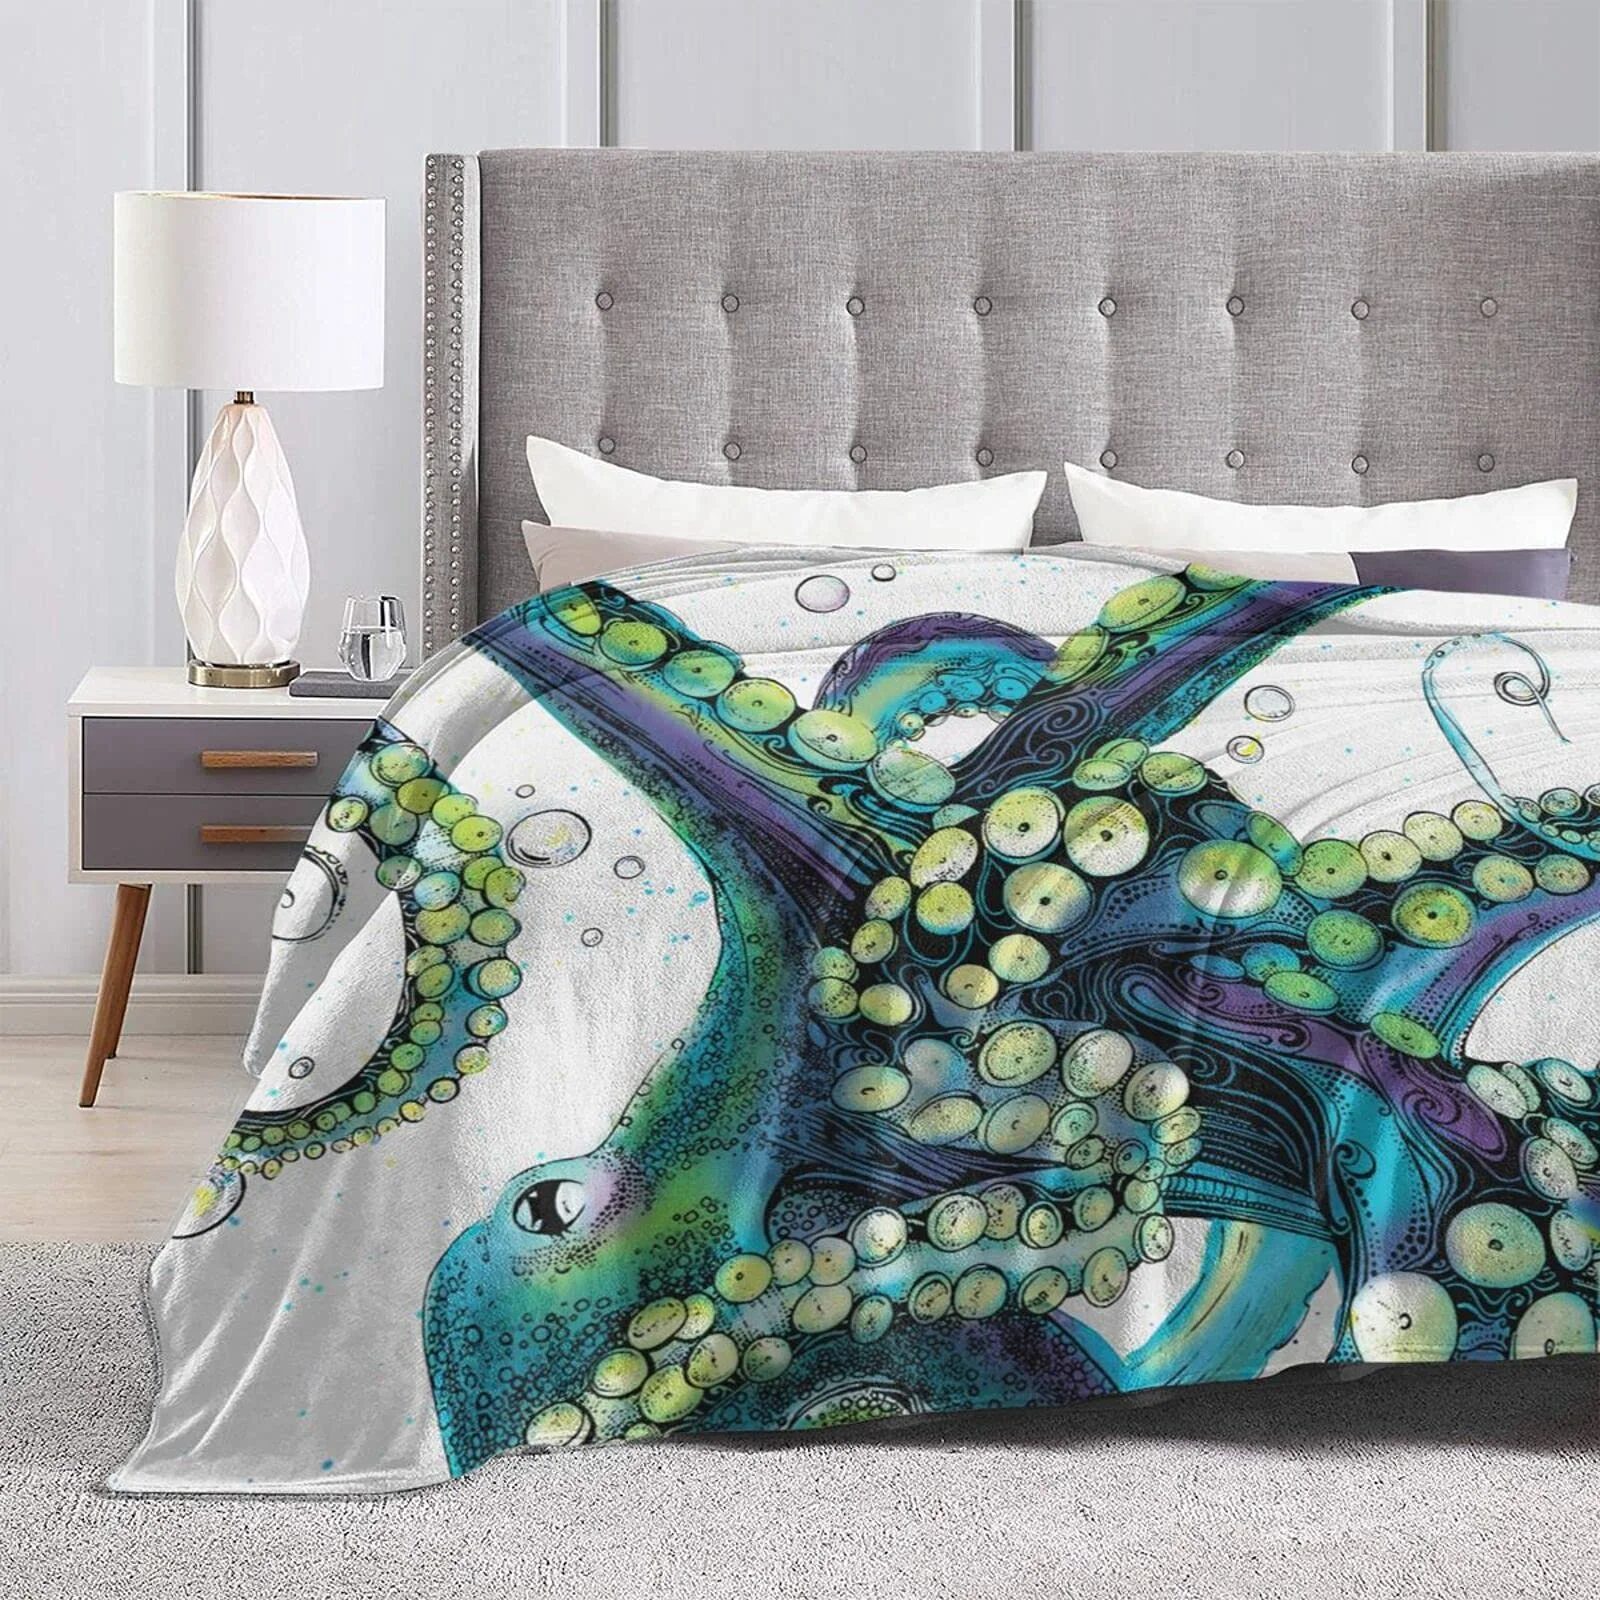 

Blankets Flannel Bed Couch Throws Lightweight All Seasons Suitable Women Men Kids Customized Peacock Colorful Fashion Octopus